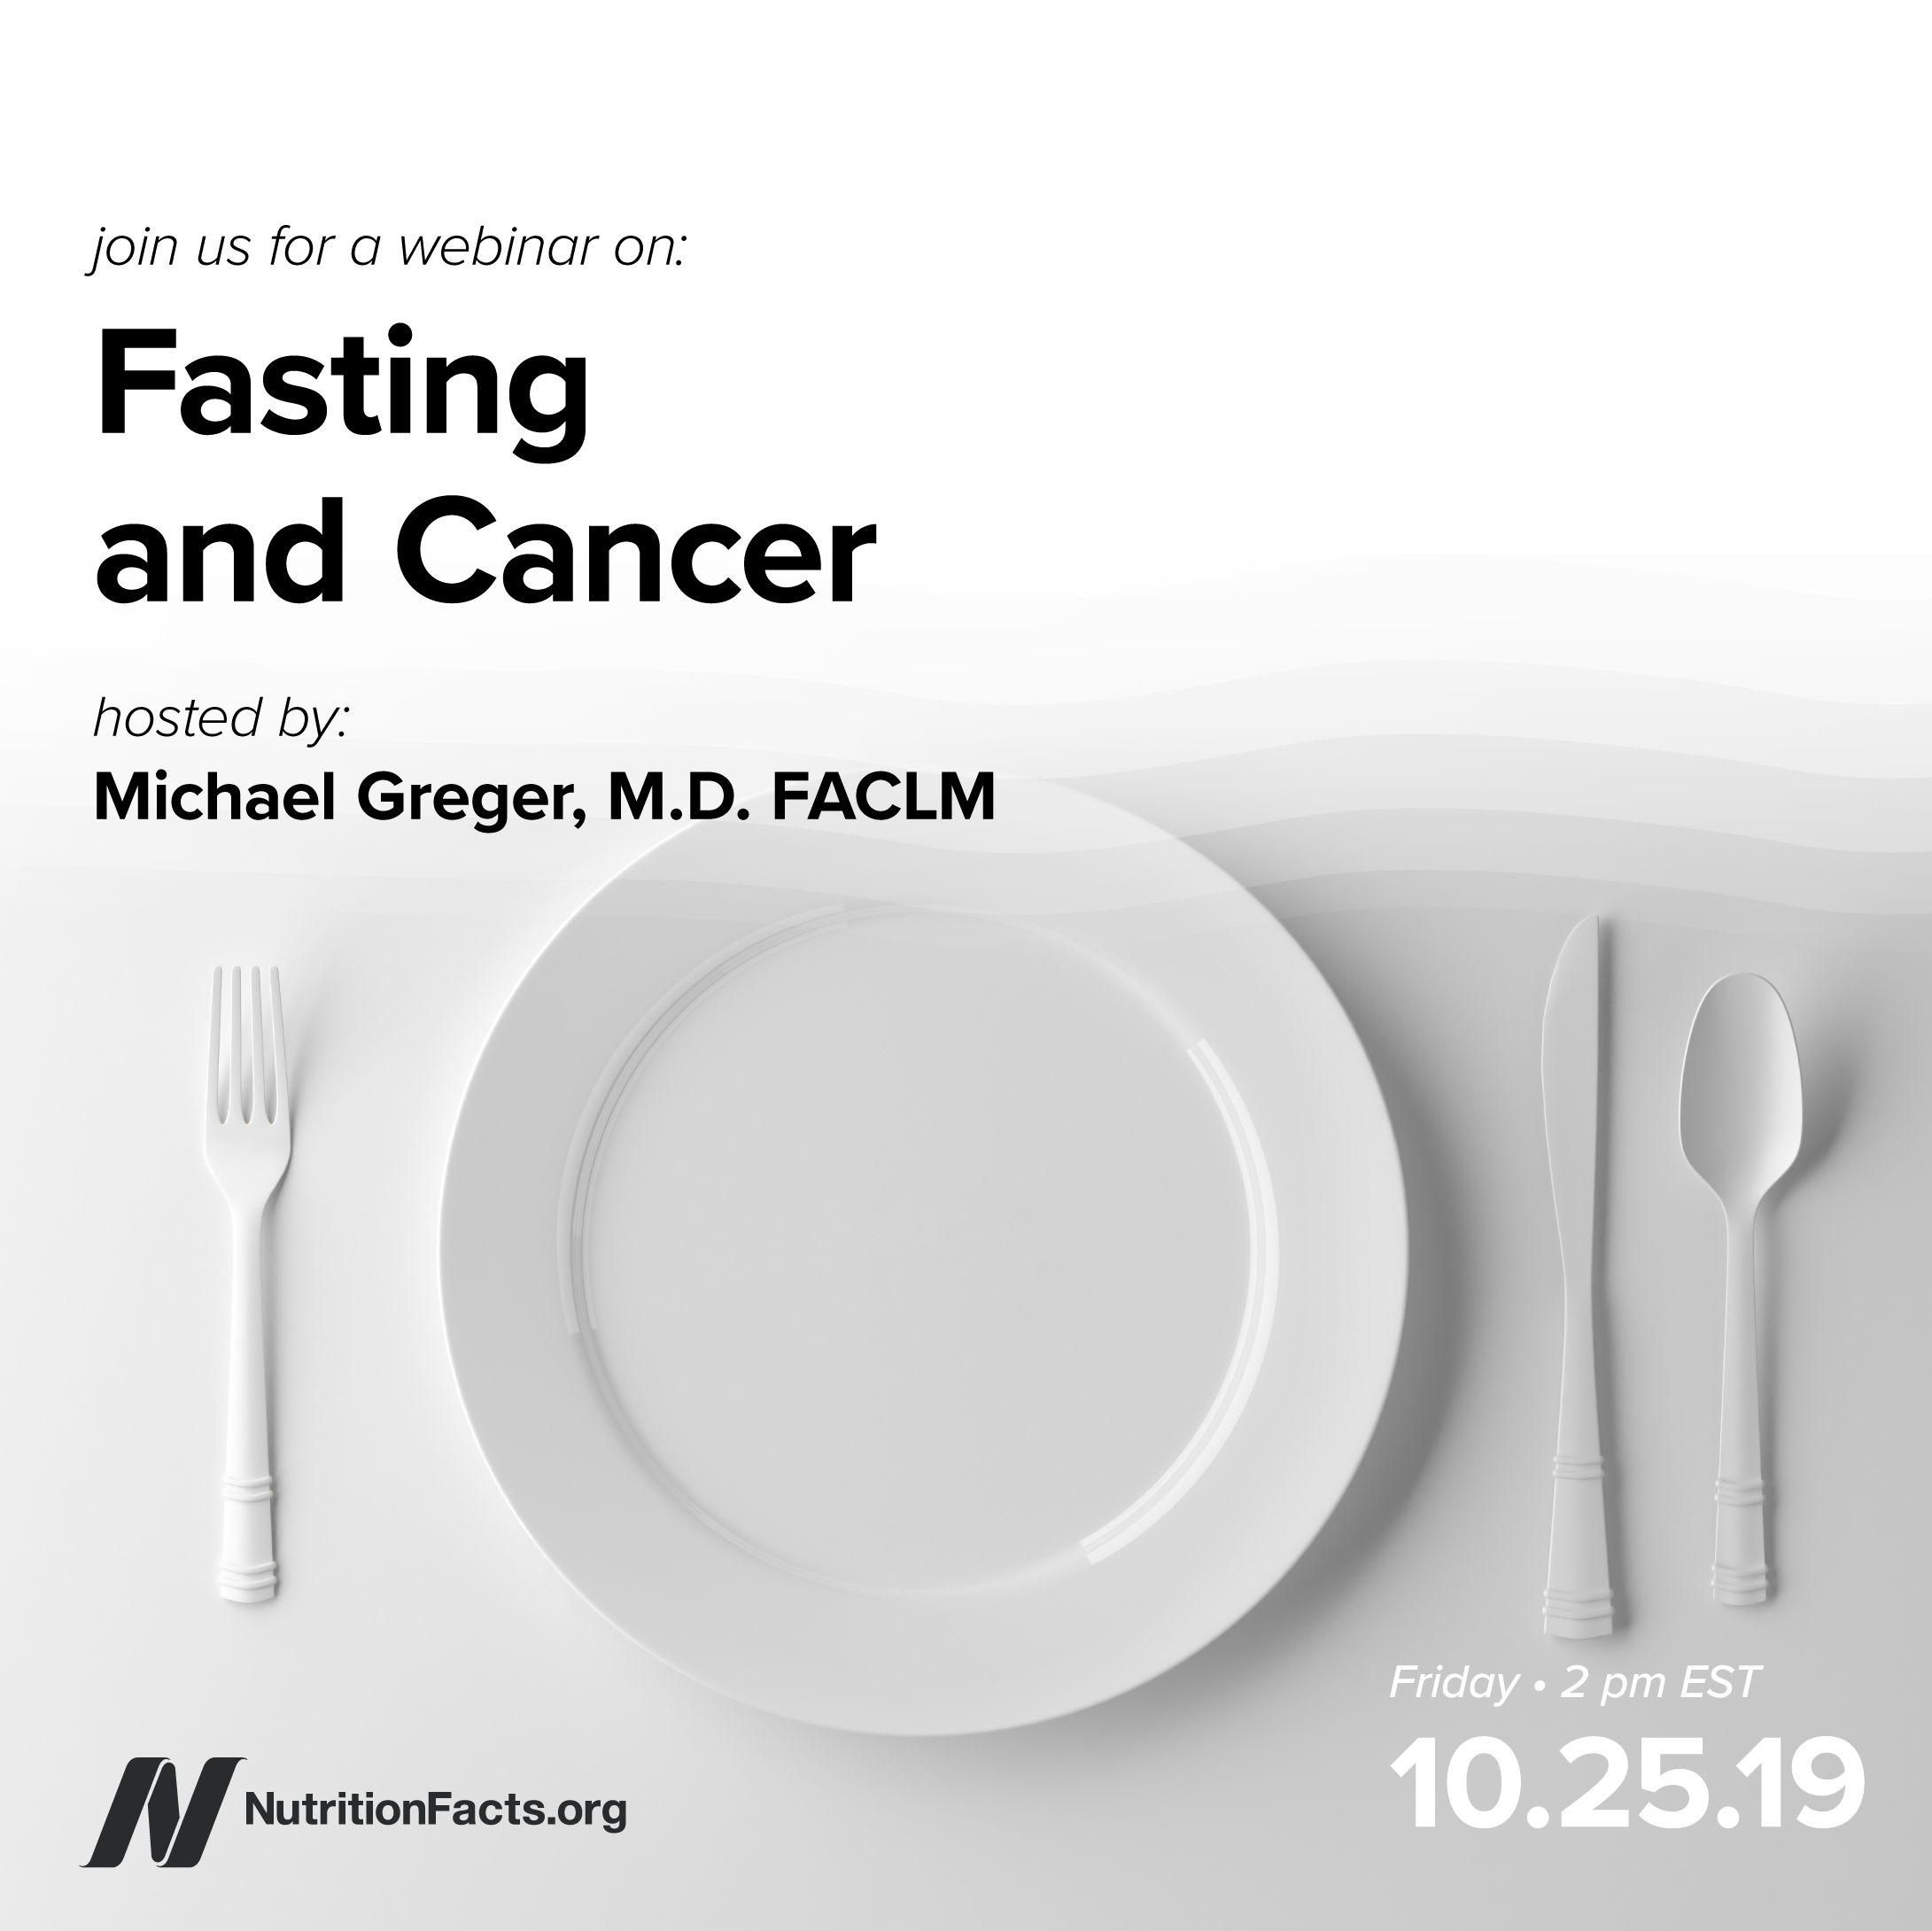 Fasting and Cancer Webinar